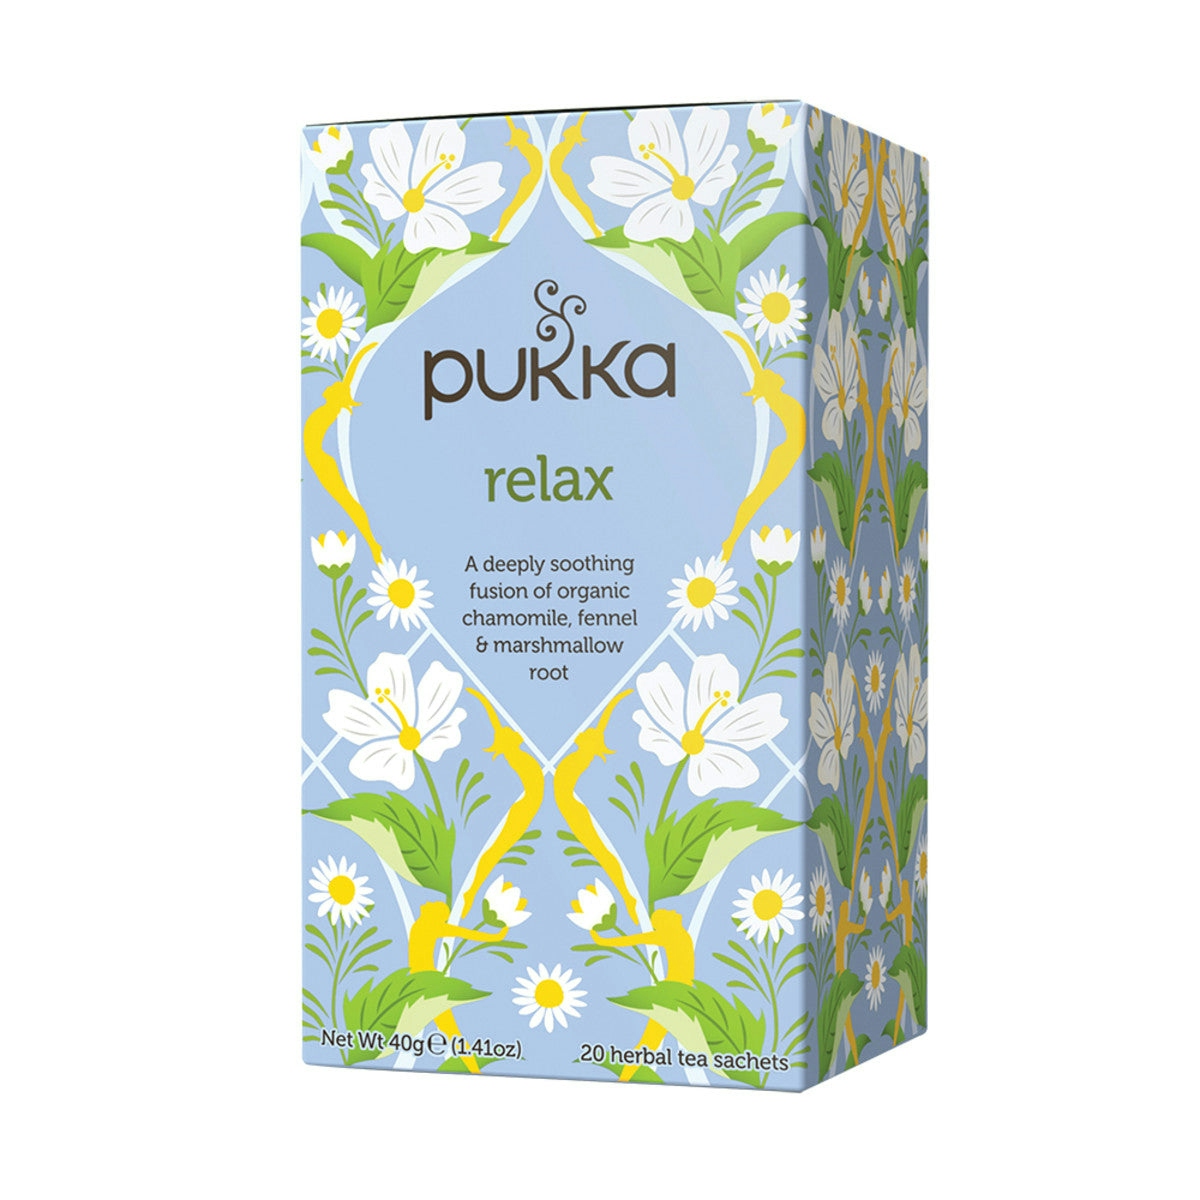 image of Pukka Relax x 20 Tea Bags on white background